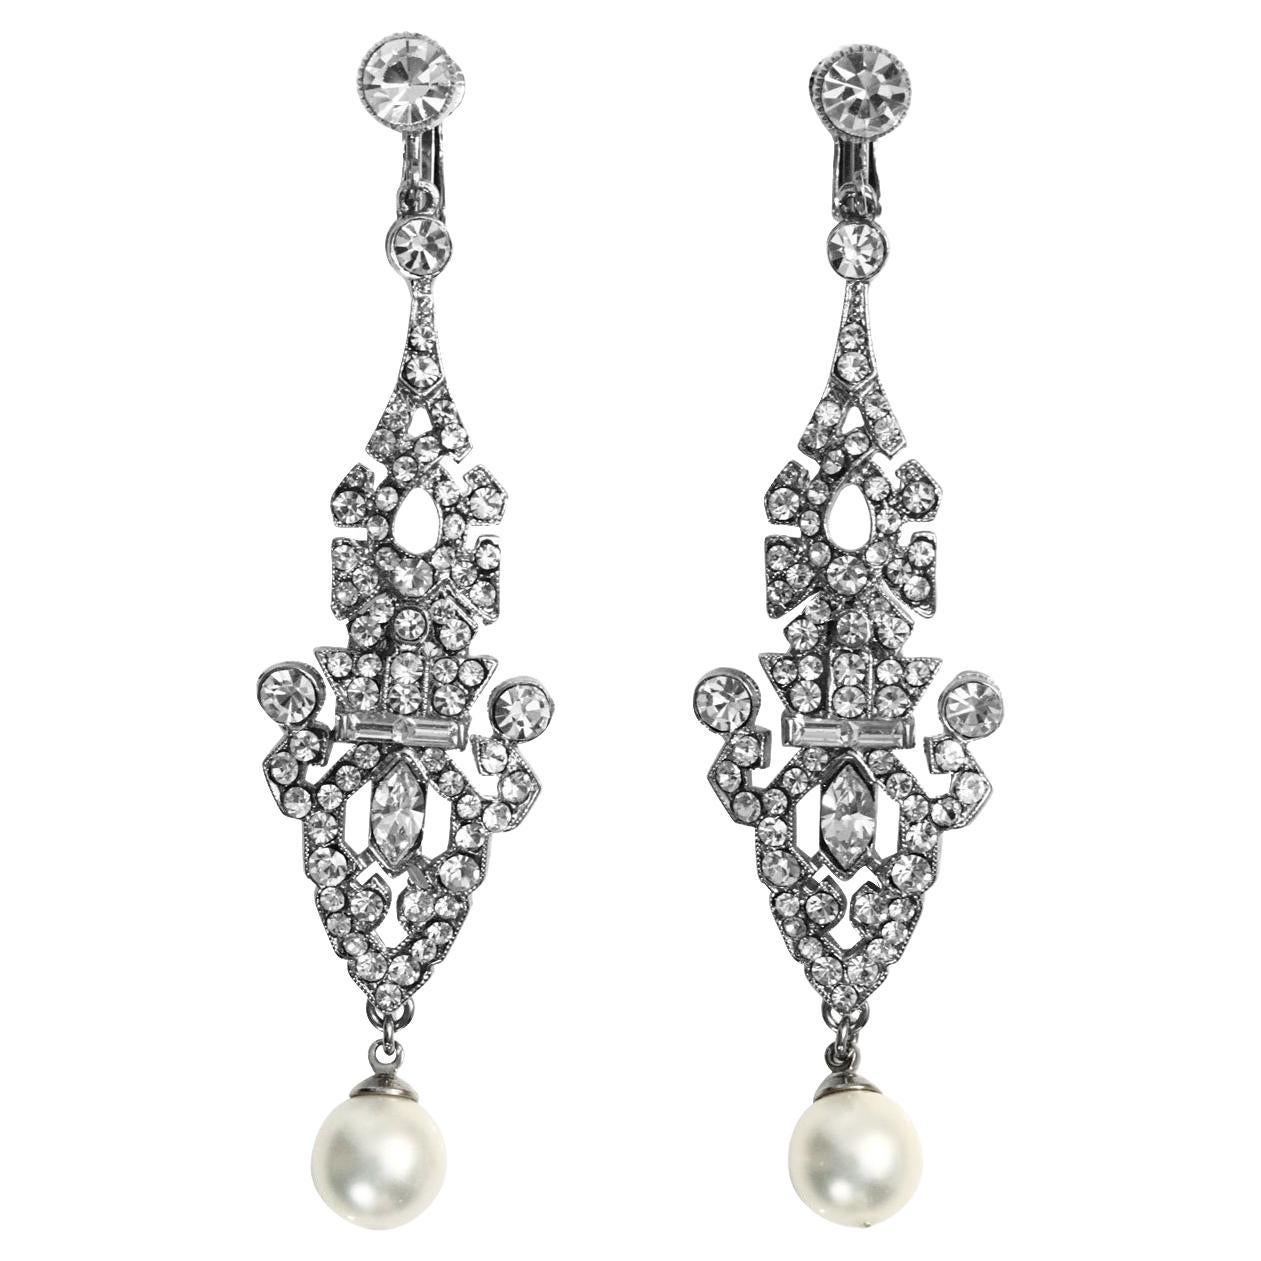 Vintage Art Deco Diamante with Faux Pearl Dangling Earrings, Circa 1980s